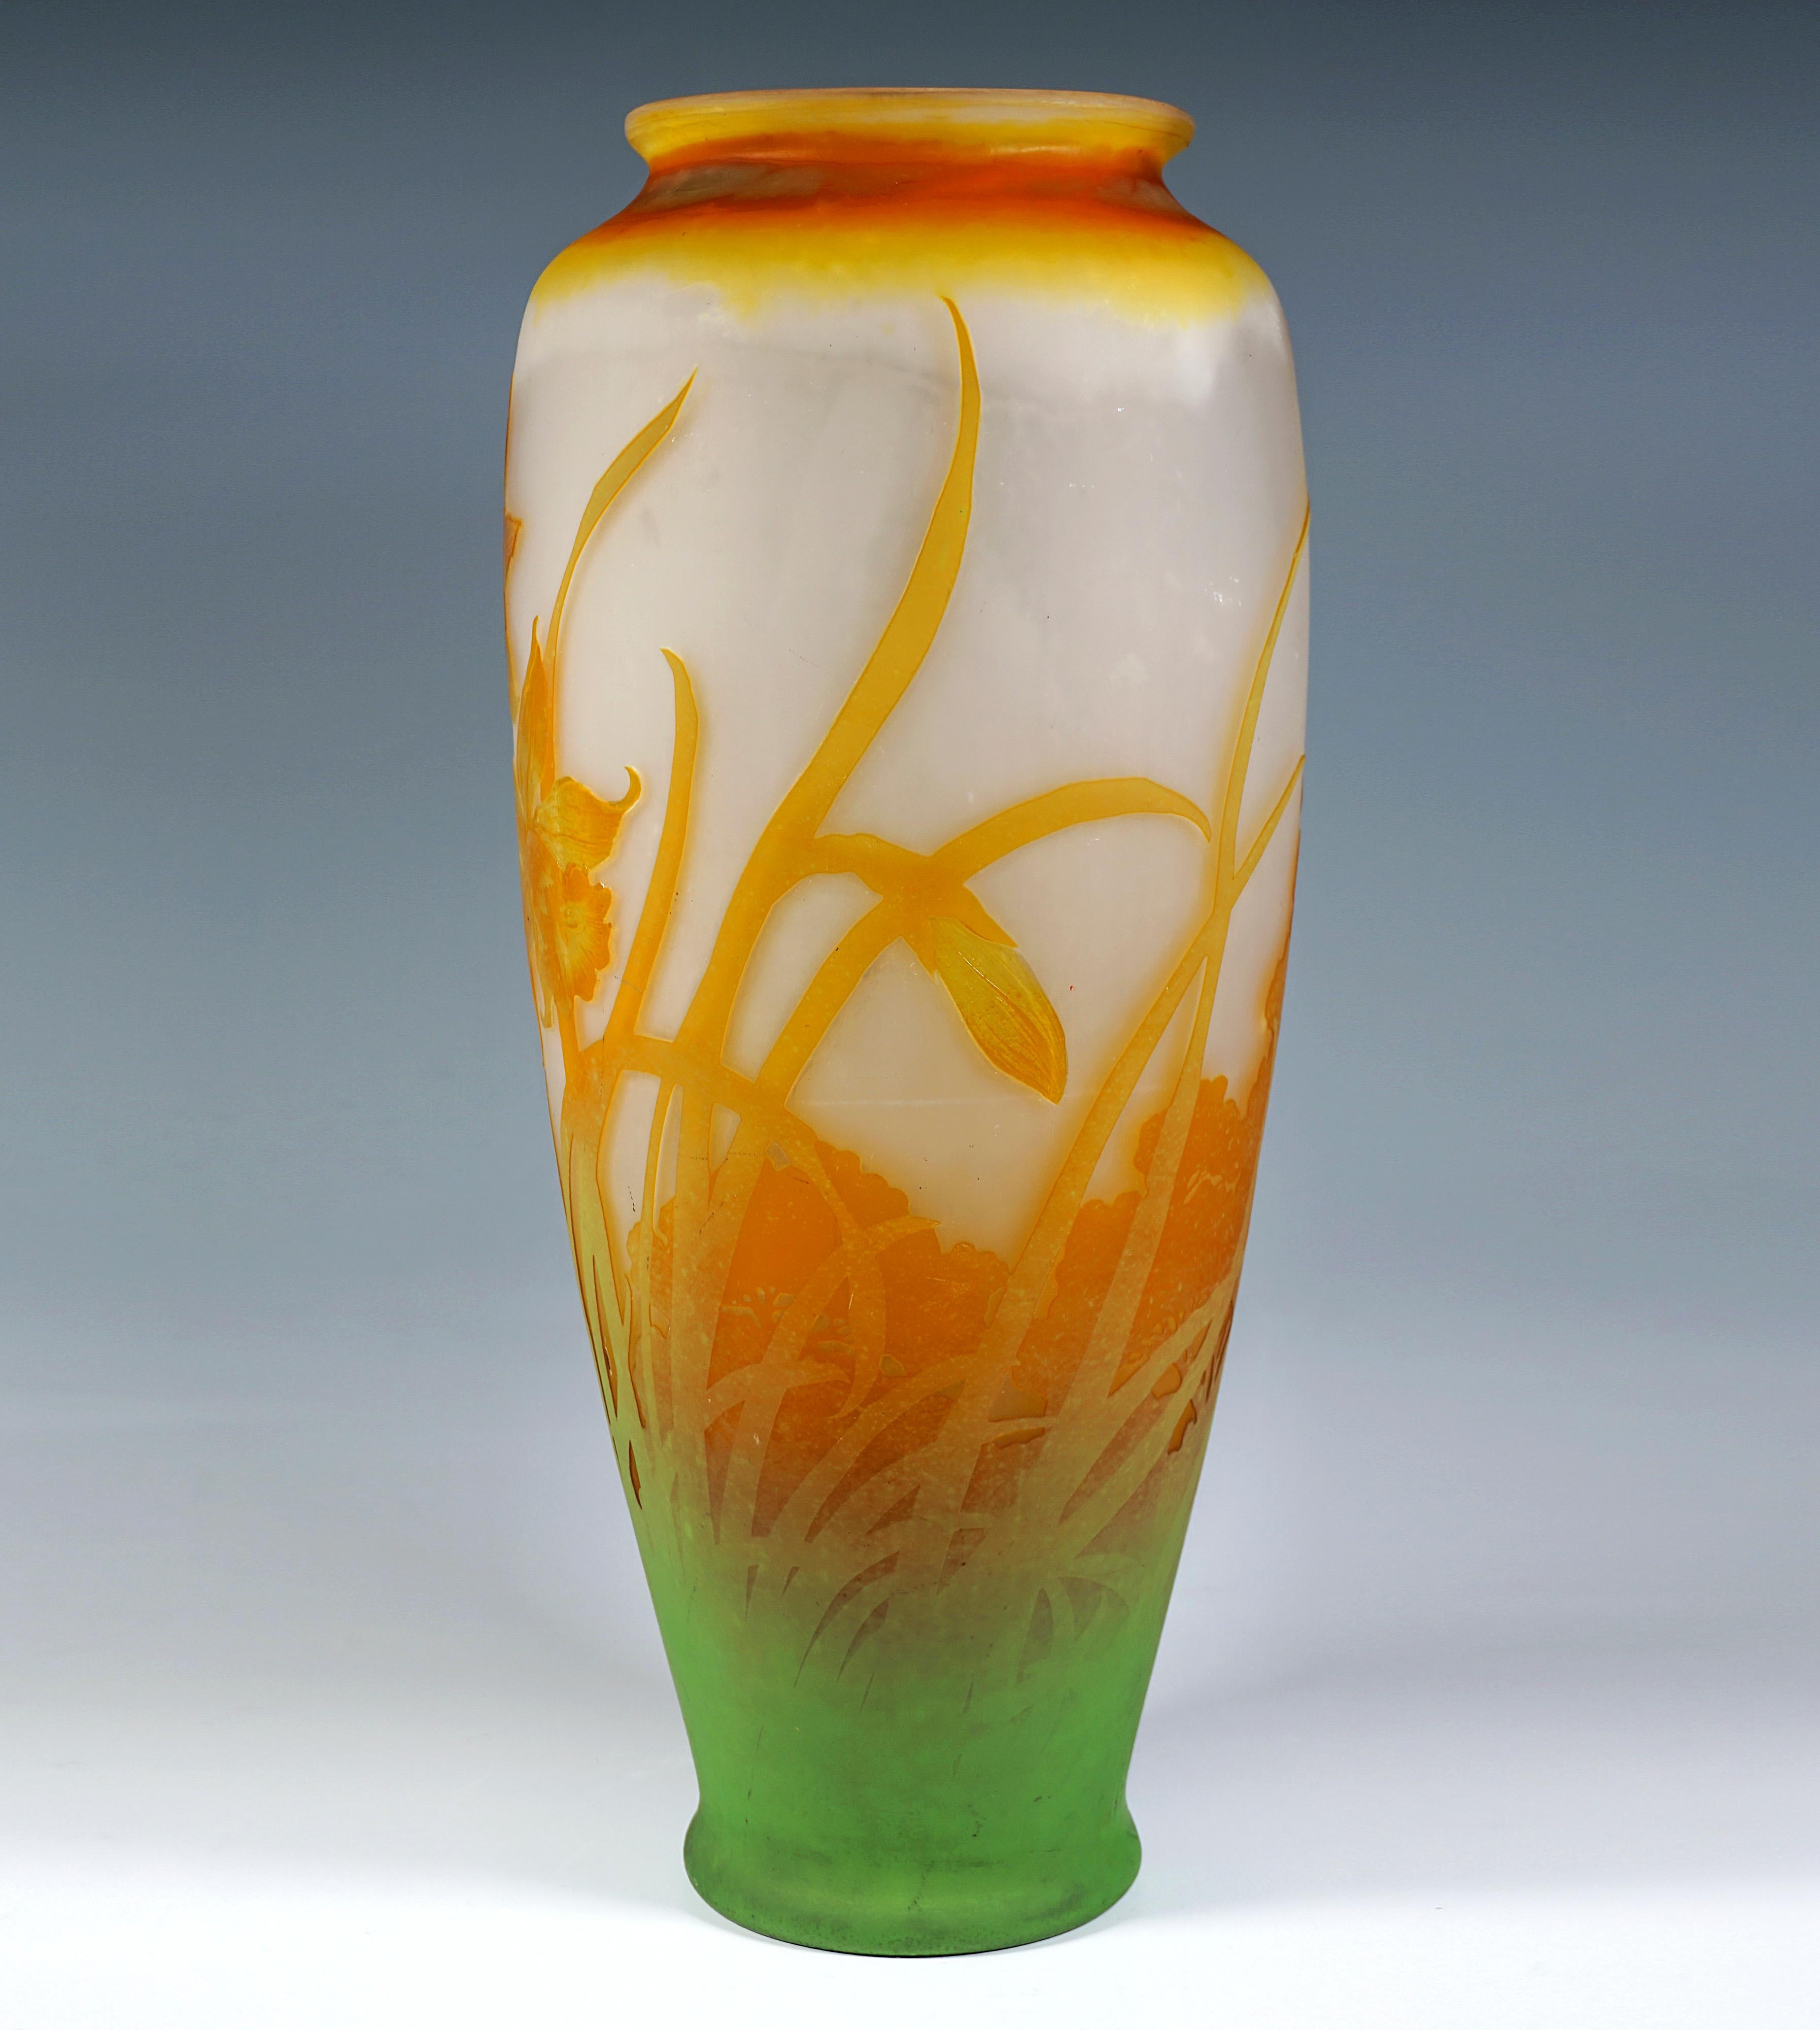 Baluster-shaped vase body on a slightly flared, flush base with a bulbous, upwardly widening wall, on gently sloping shoulders a constriction to form a short neck piece with a slightly flared rim, colourless glass with flaky white, yellow and